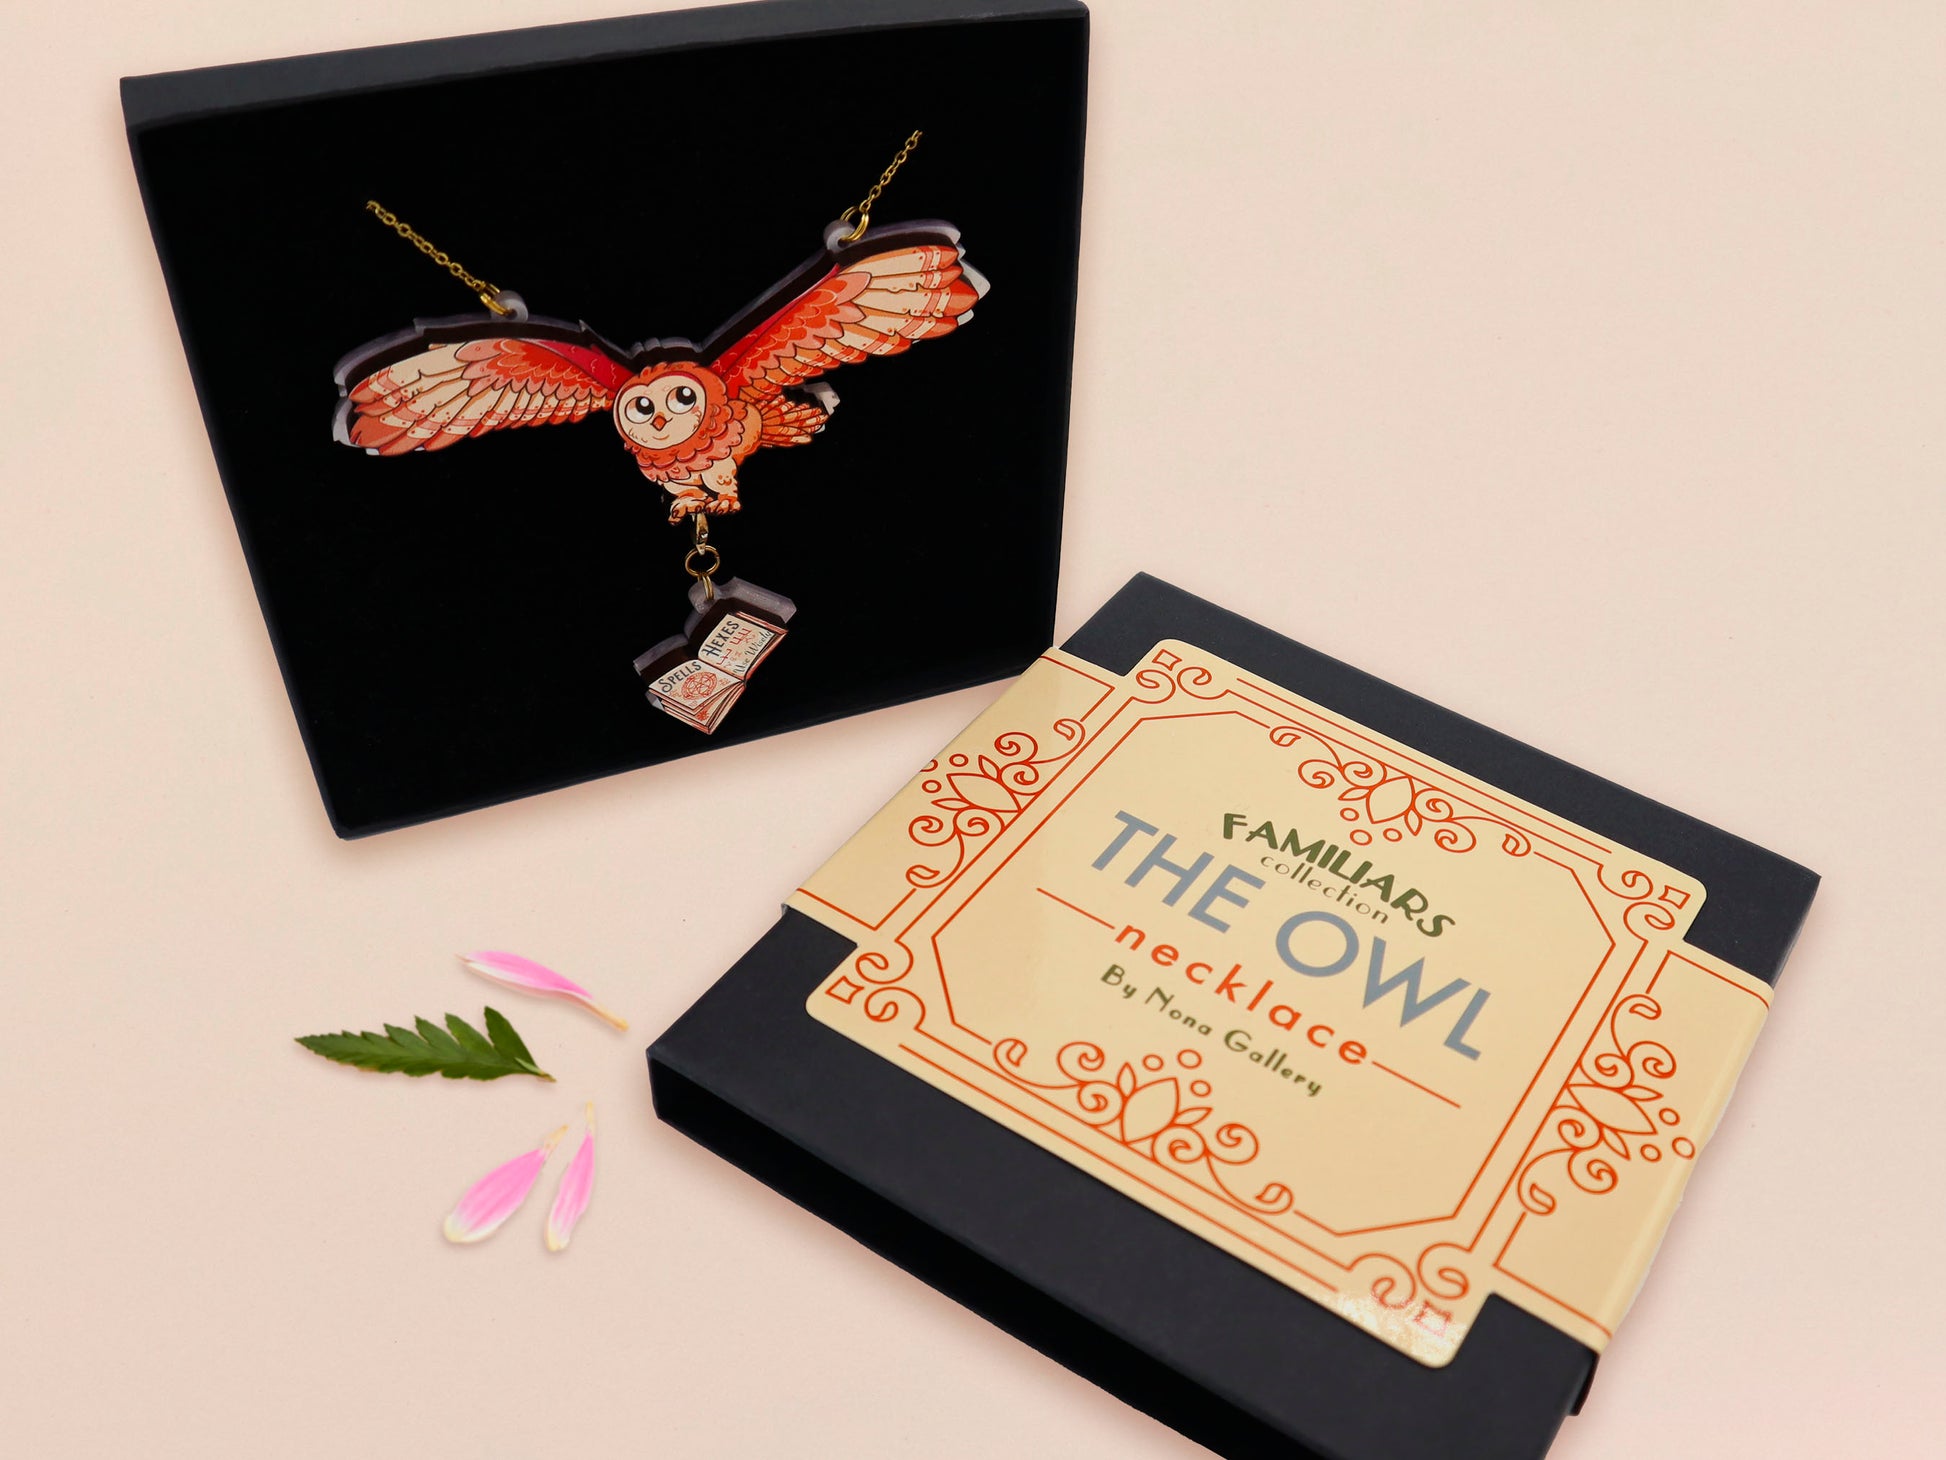 Mixed material handmade necklace of chibi cartoon flying barn owl with pearlescent wings carrying a removeable spell book charm, with a gold chain and black gift box with a yellow familiars collection gift sleeve.